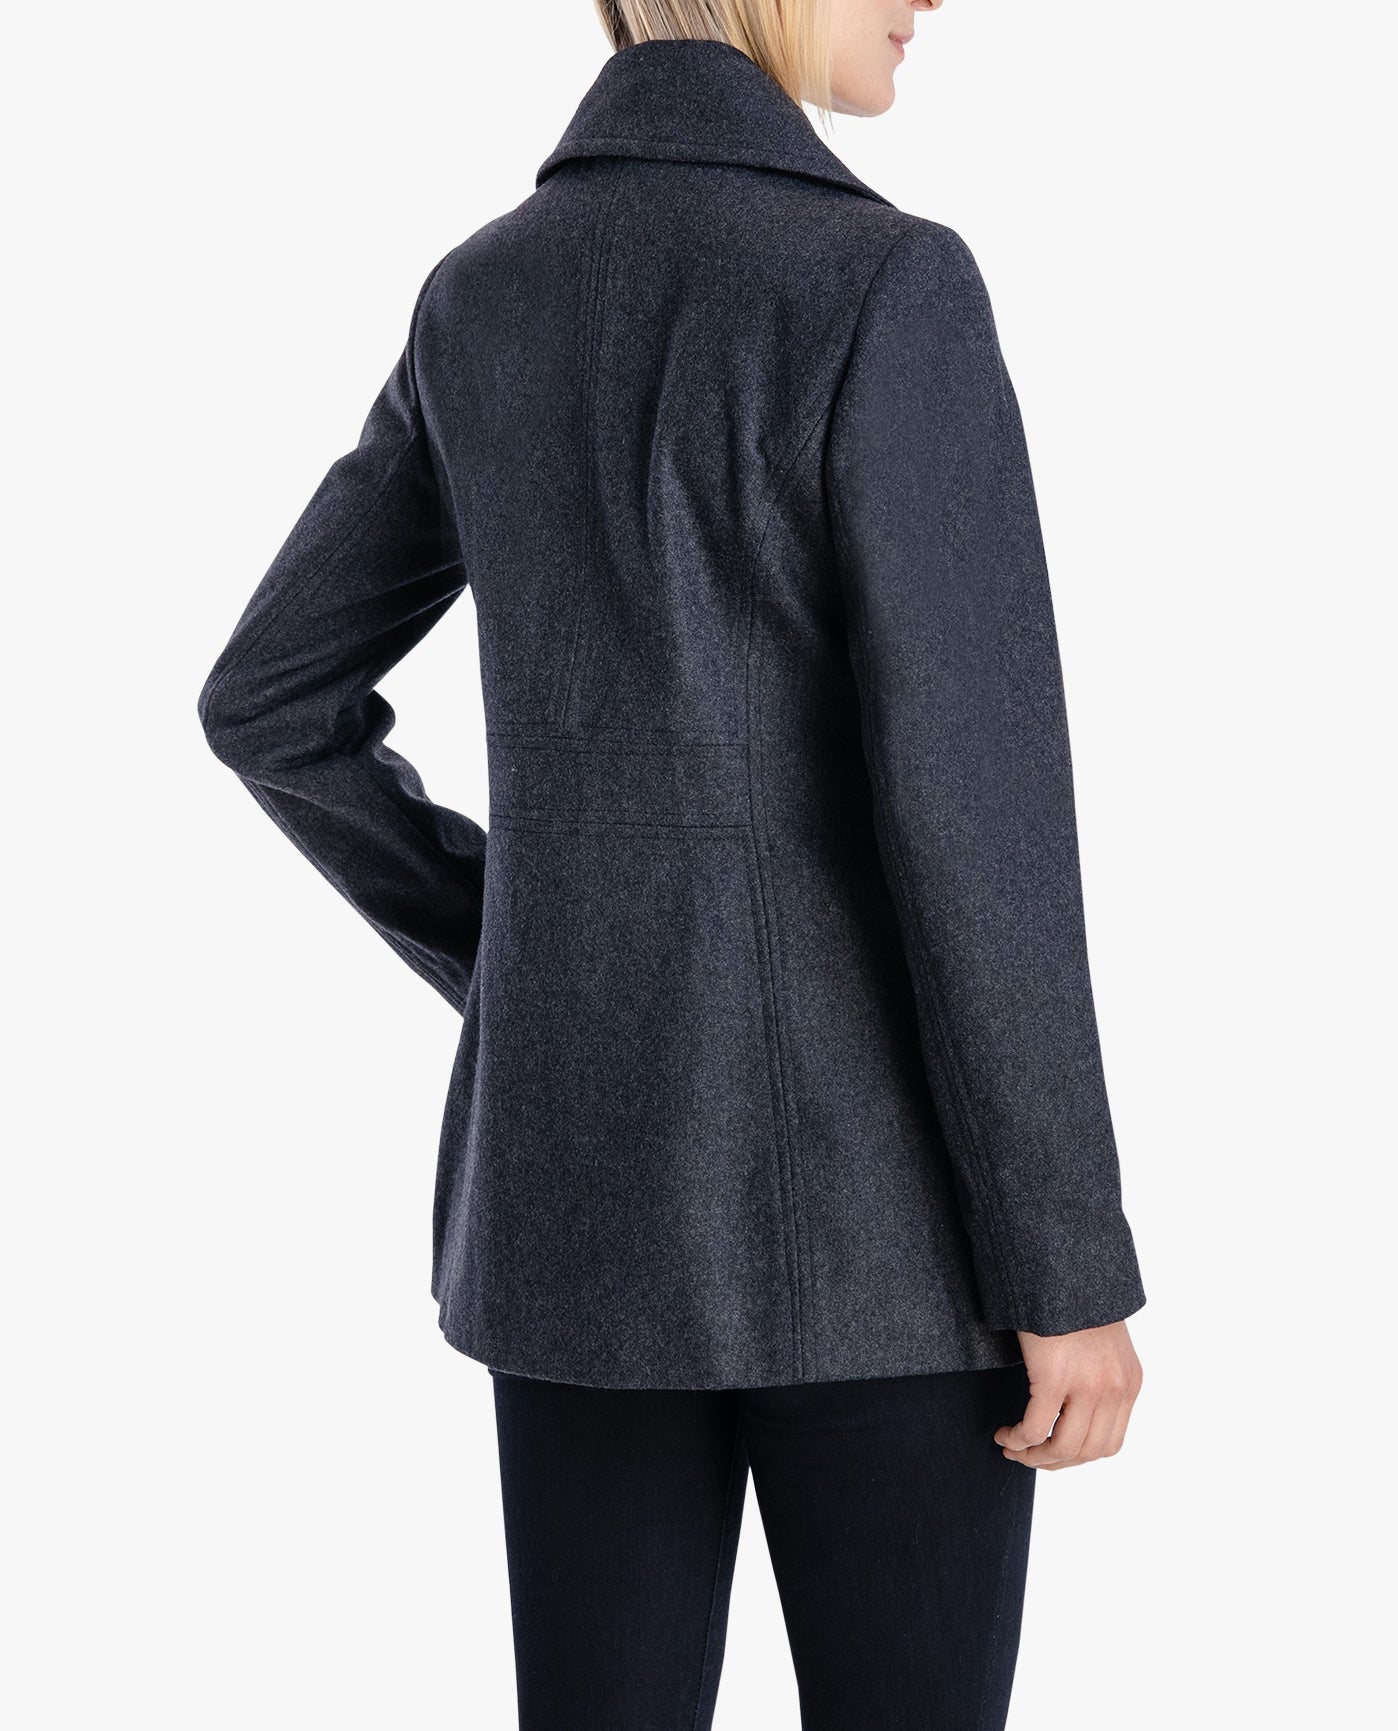 Back View Of DOUBLE BREASTED PEACOAT WITH SCARF | CHARCOAL